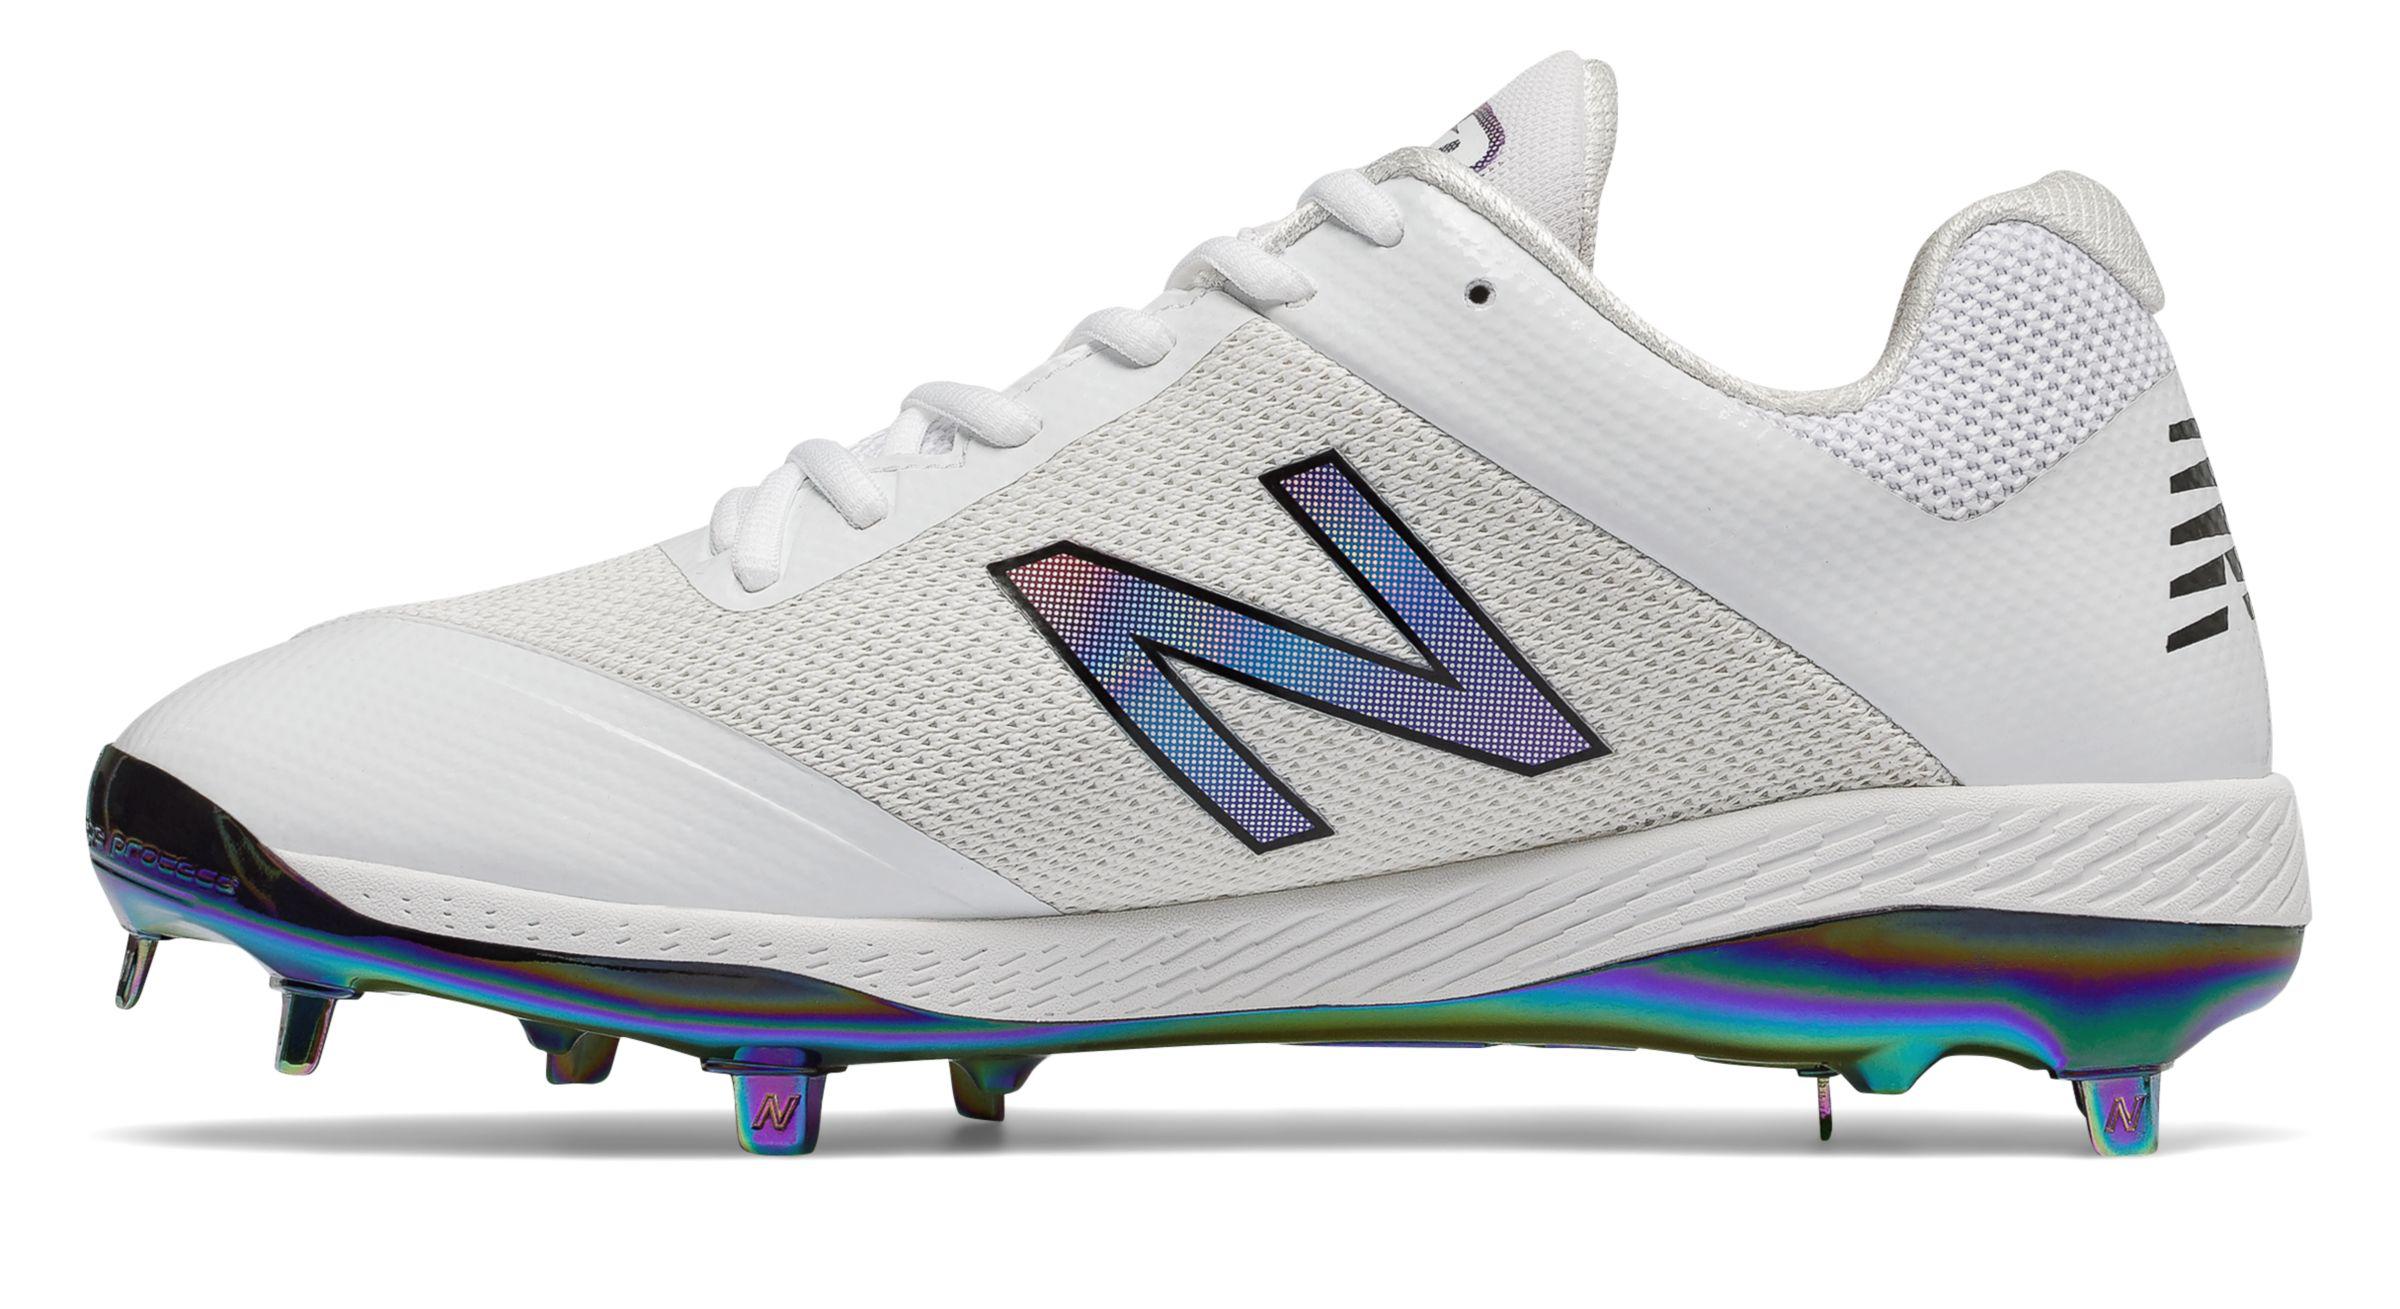 4040v4 sunset pack cleats off 61% - www 